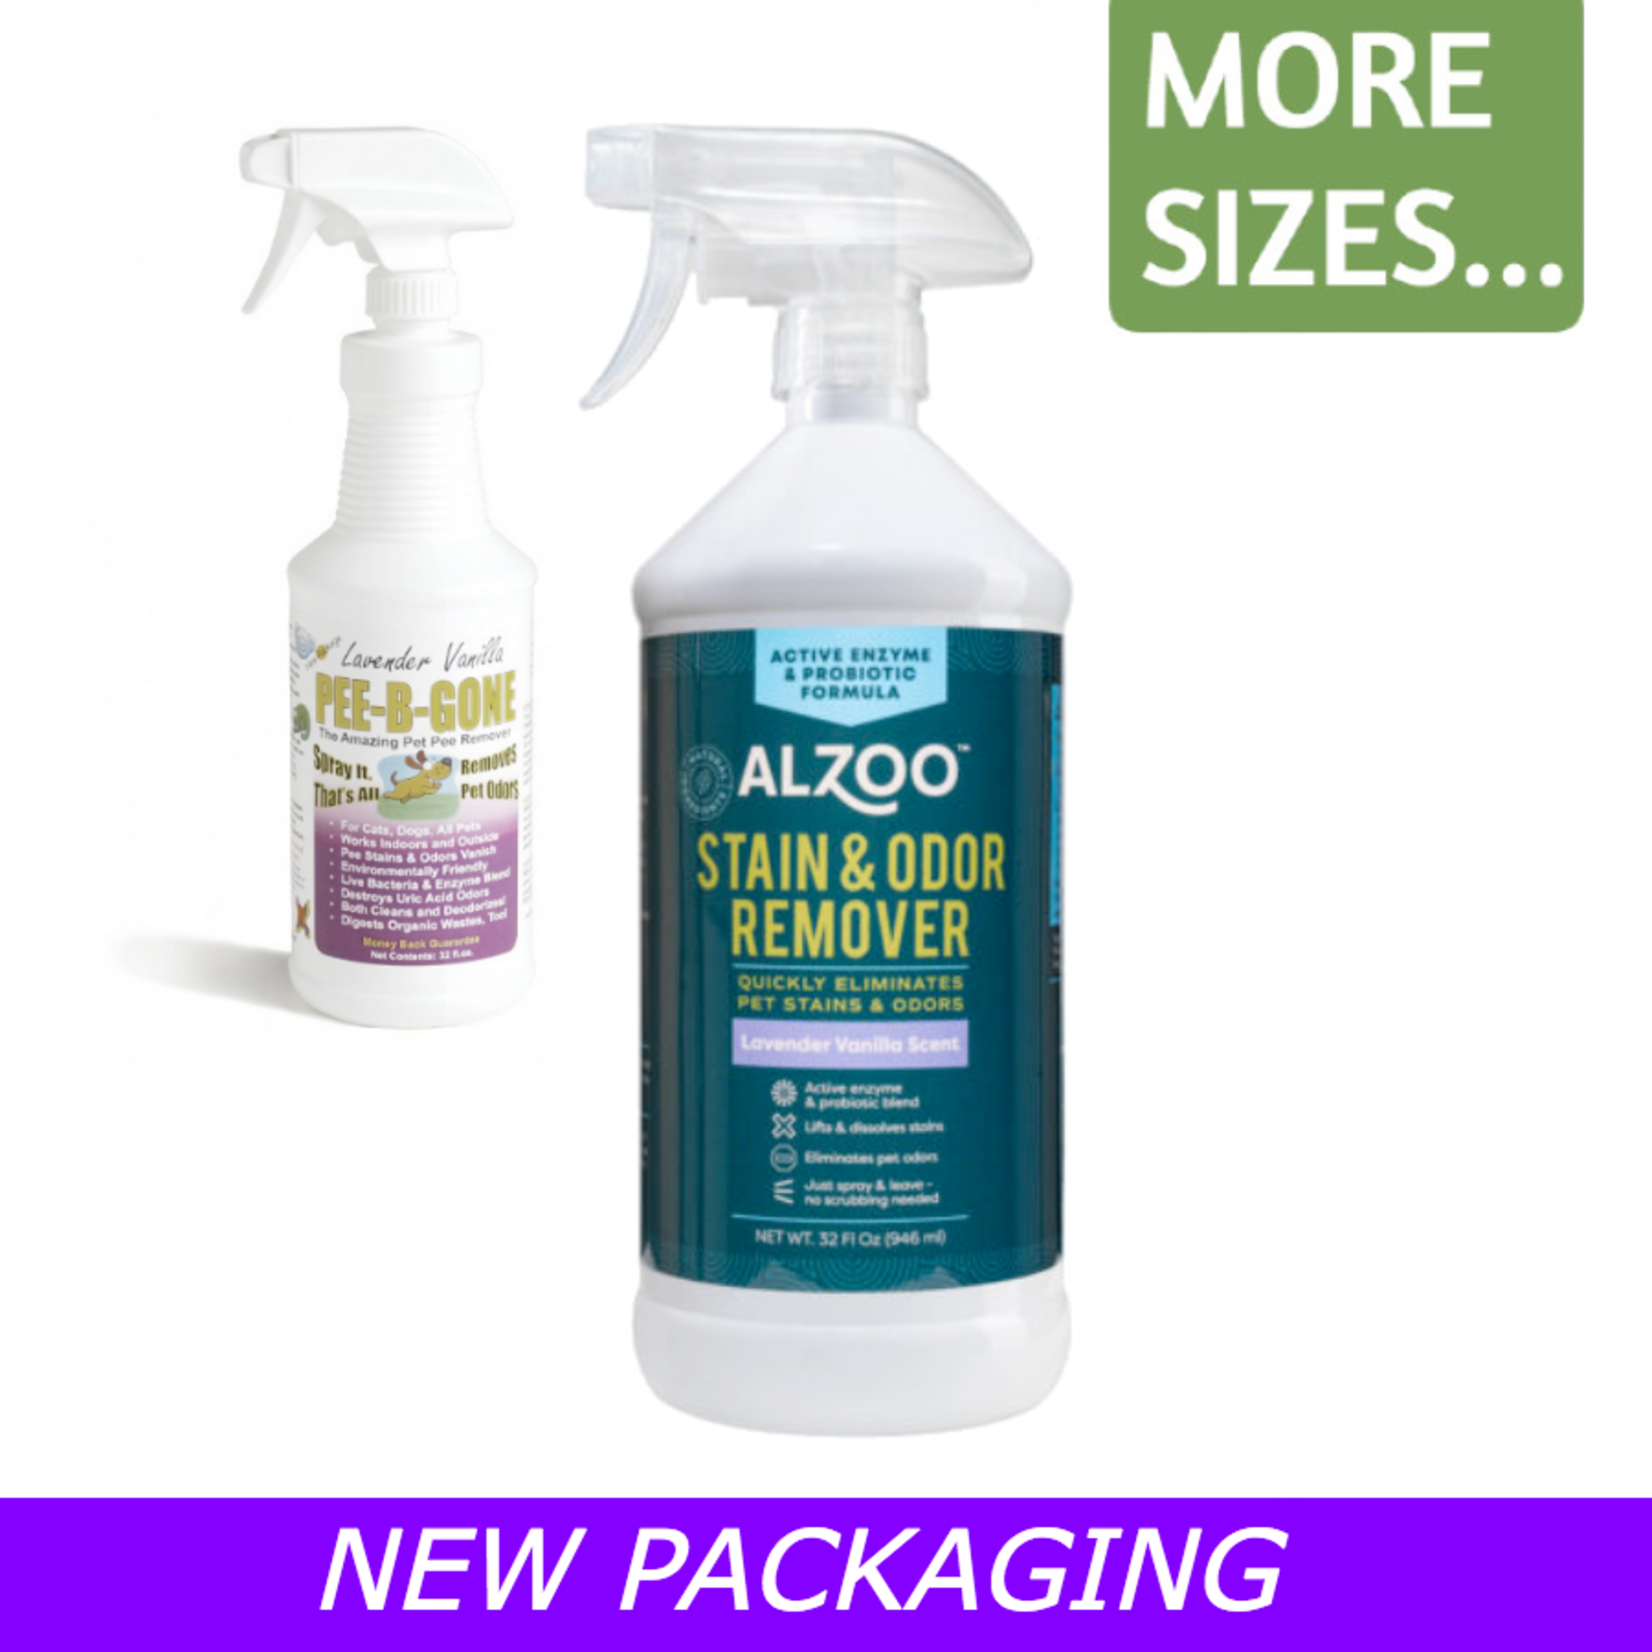 Pee-B-Gone Alzoo Pee-B-Gone Lavender Vanilla Scent Pet Stain & Odor Remover